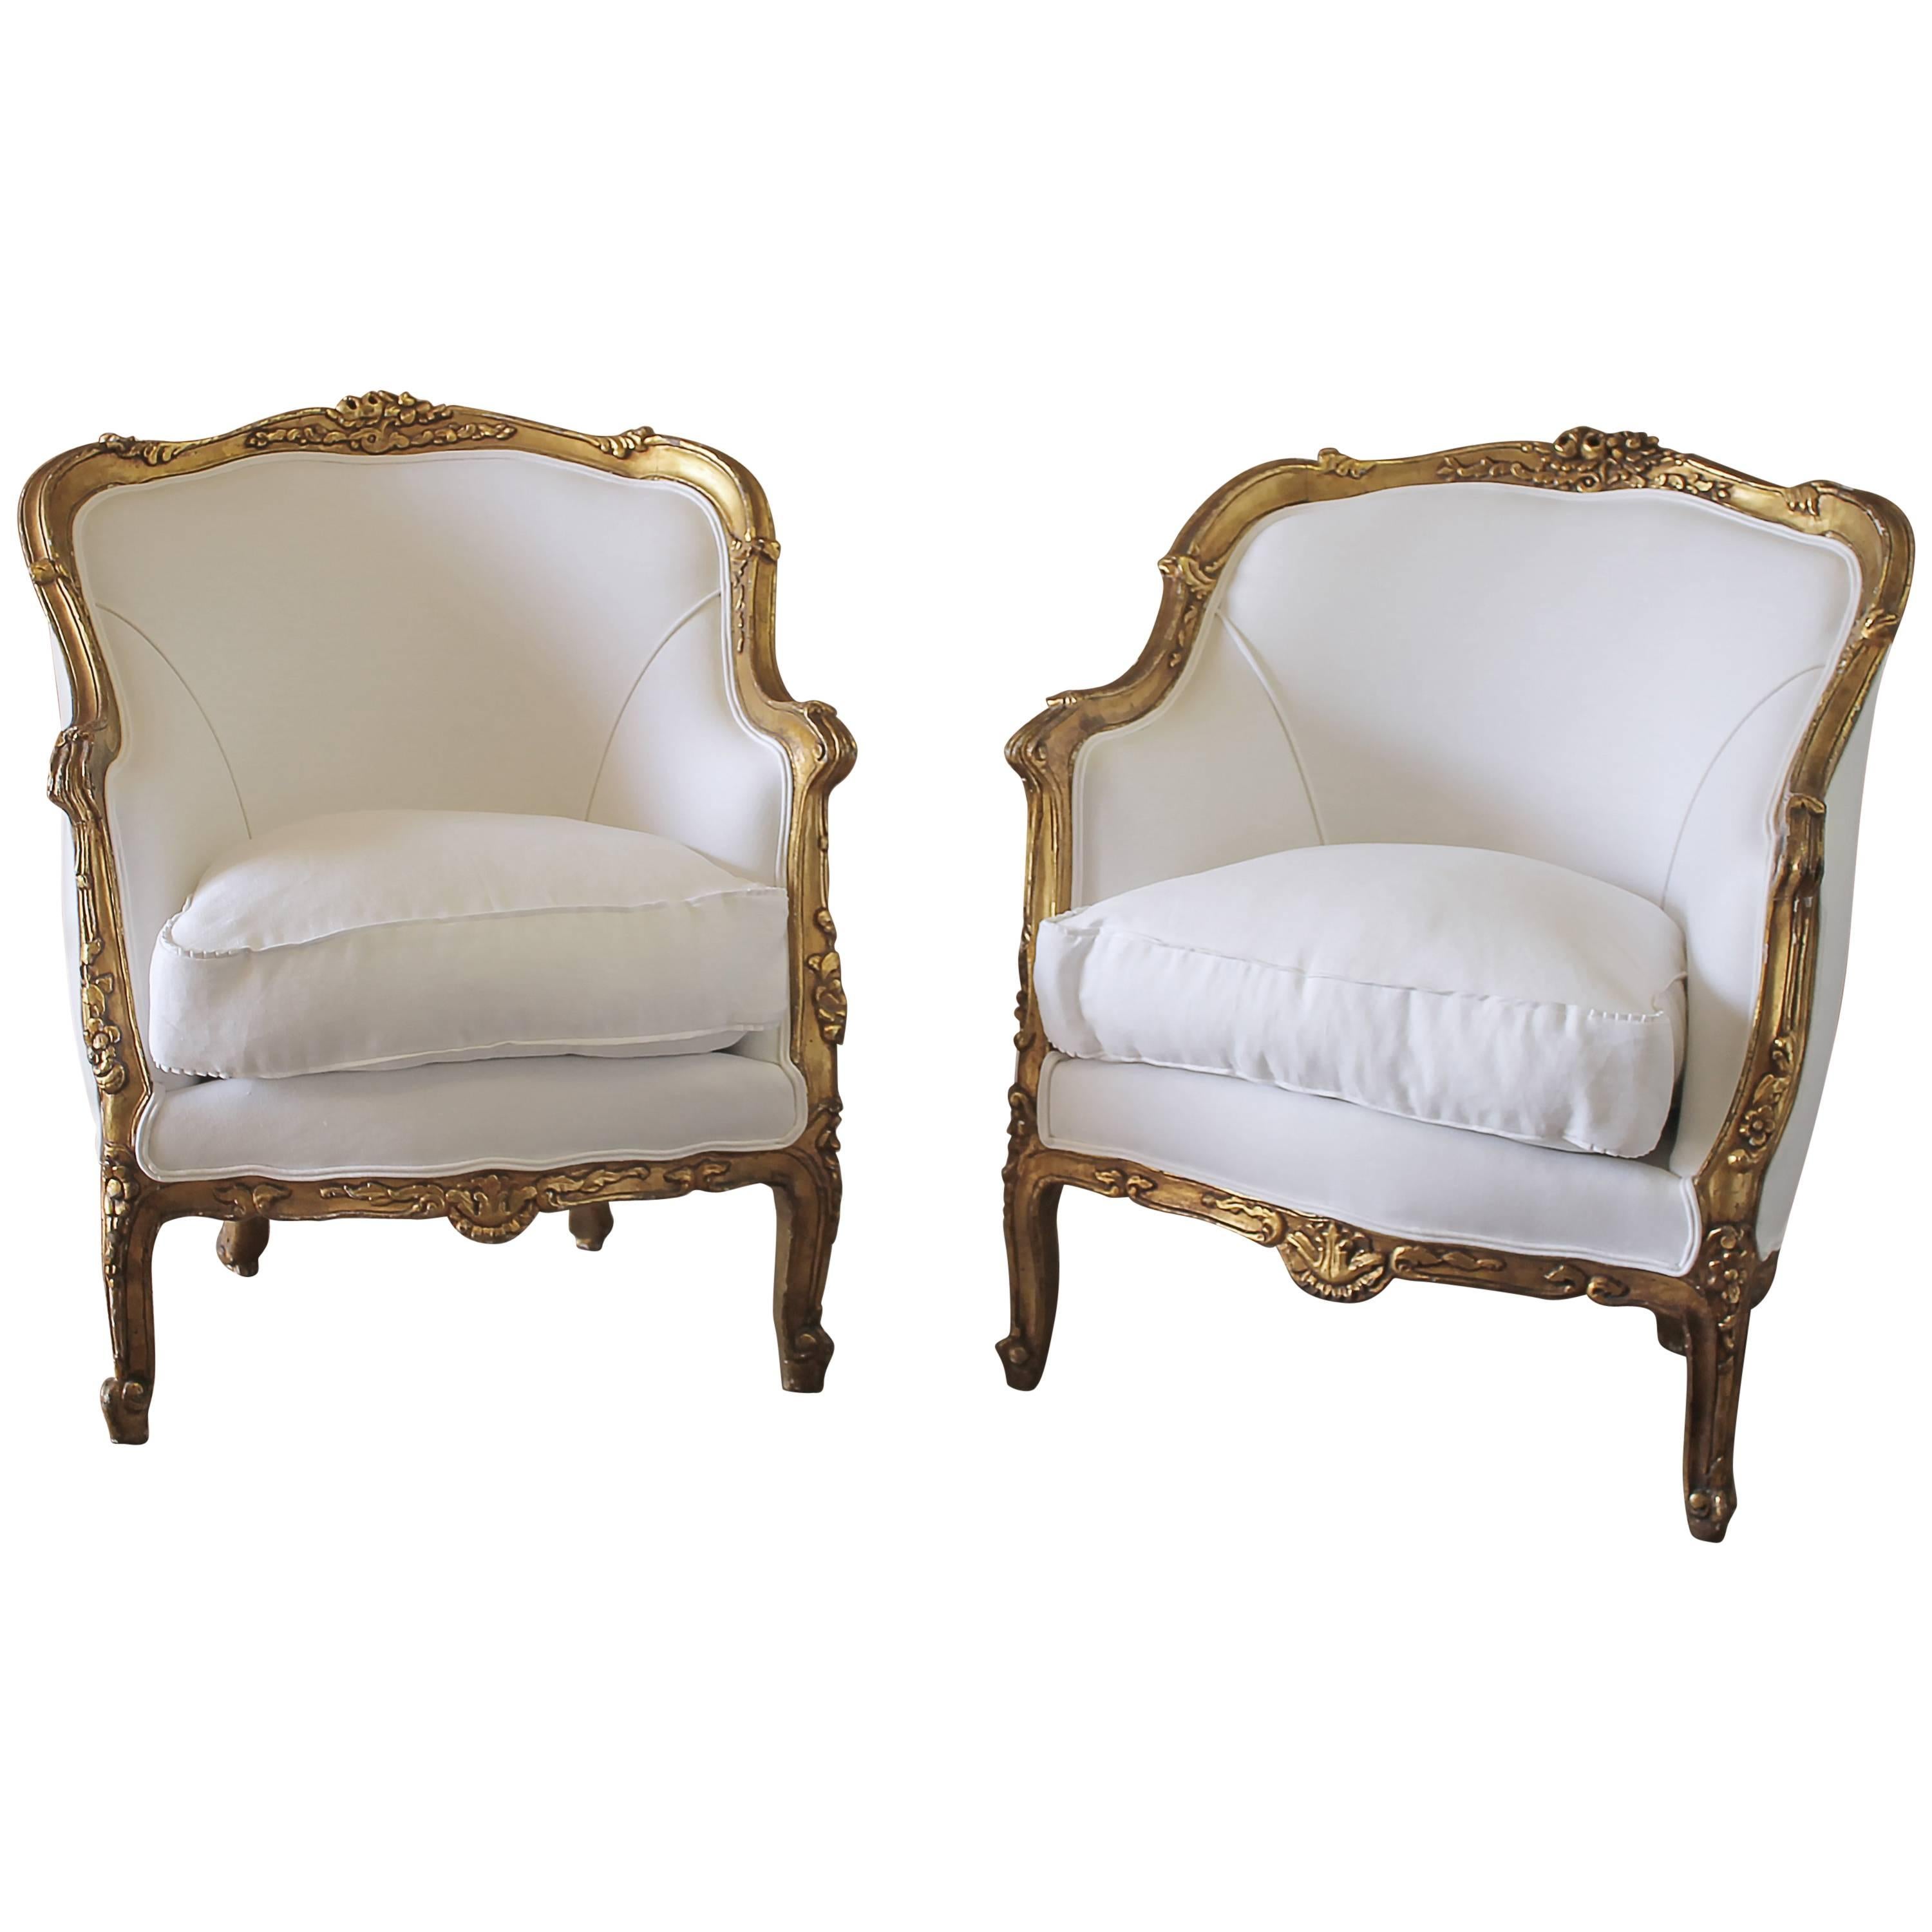 20th Century Giltwood Carved Bergere Chairs in White Belgian Linen